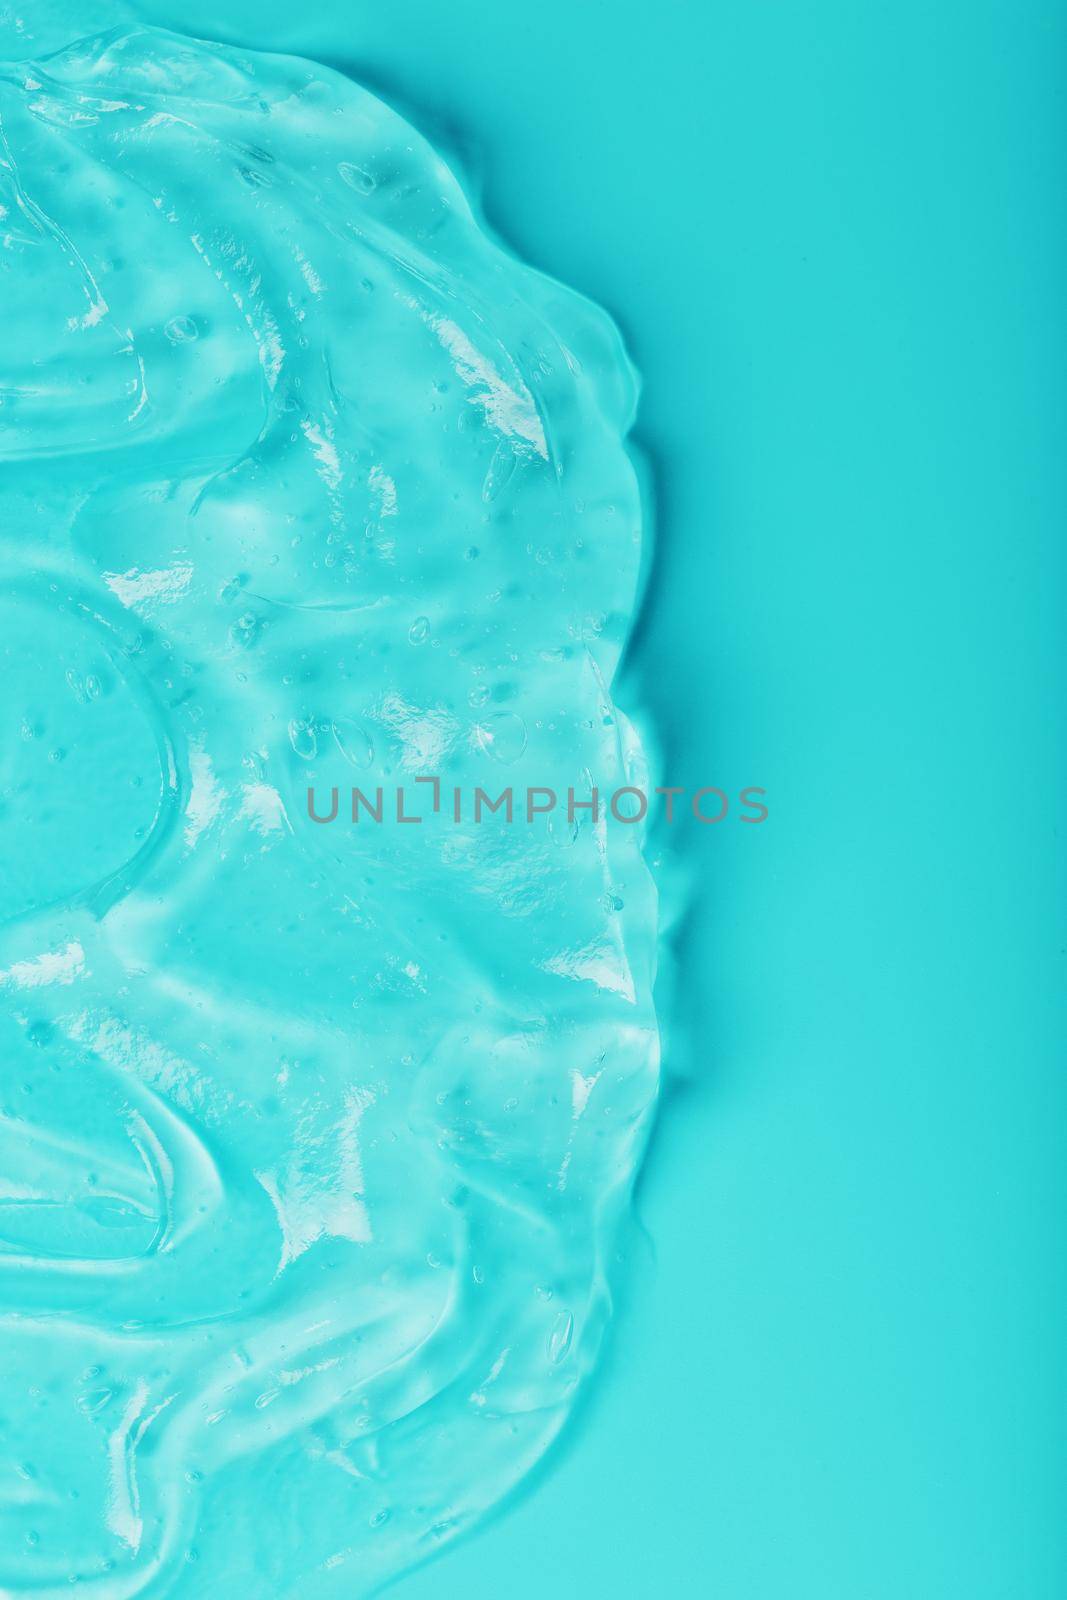 Antiseptic gel on a cyan background in waves. by AlexGrec